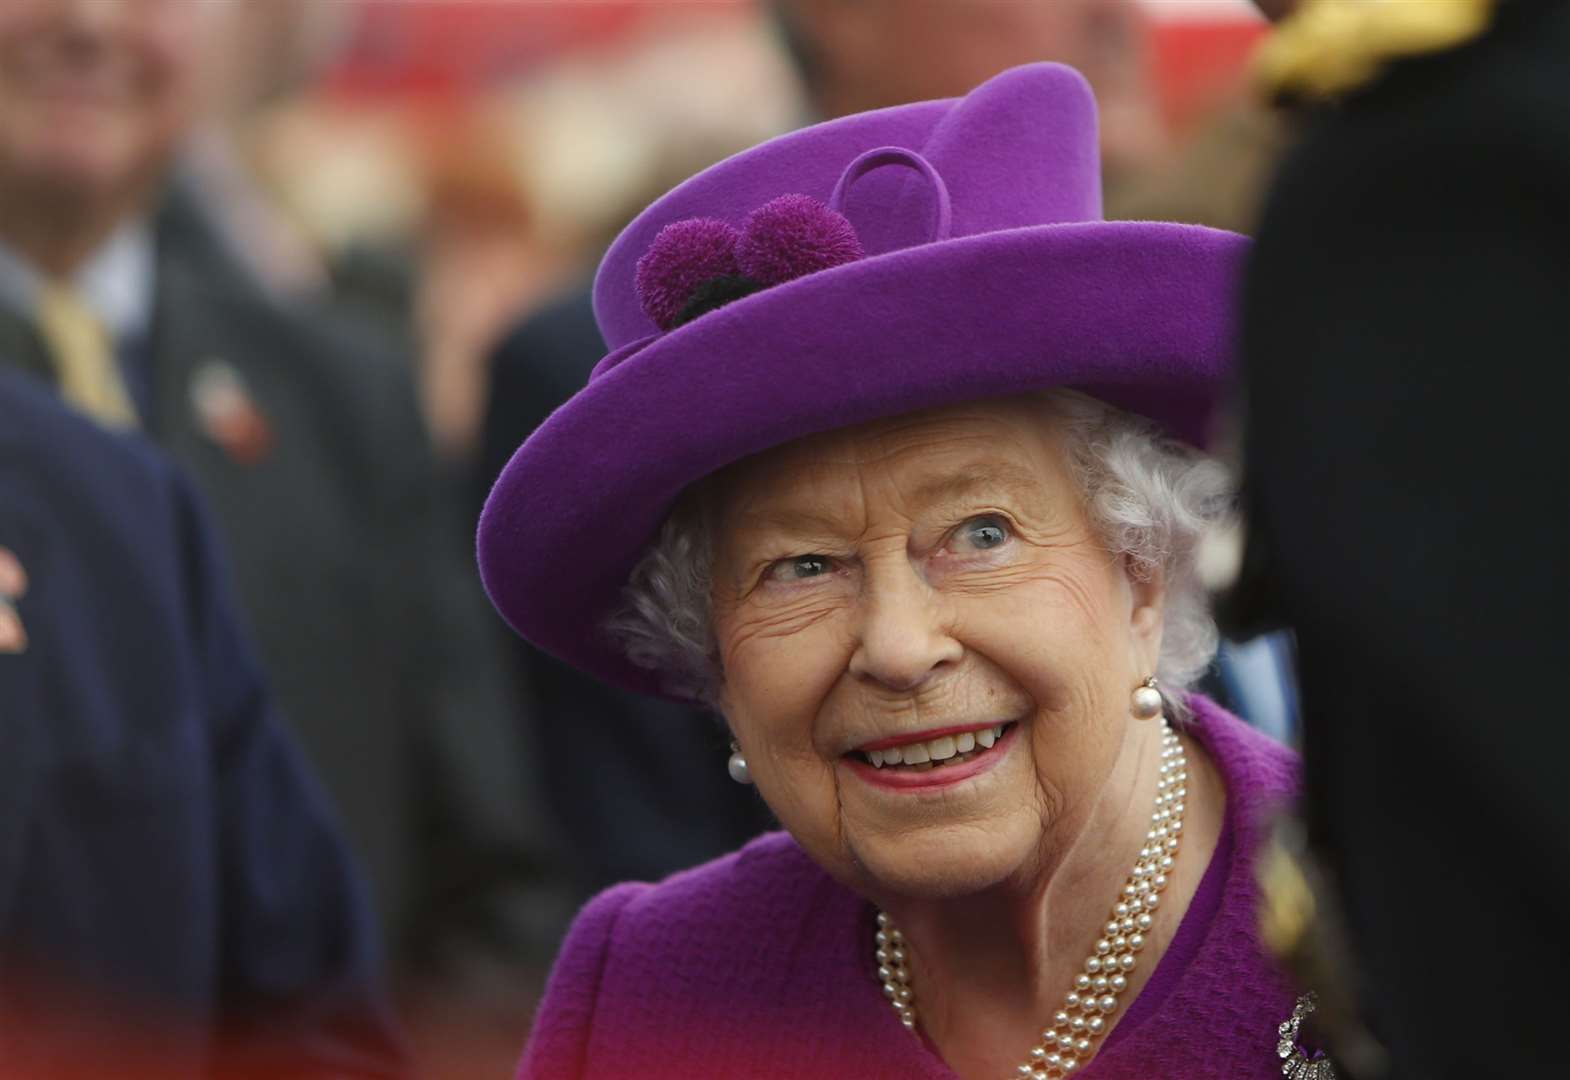 The Queen visits Kent: Photos capture moments which made Her Majesty smile